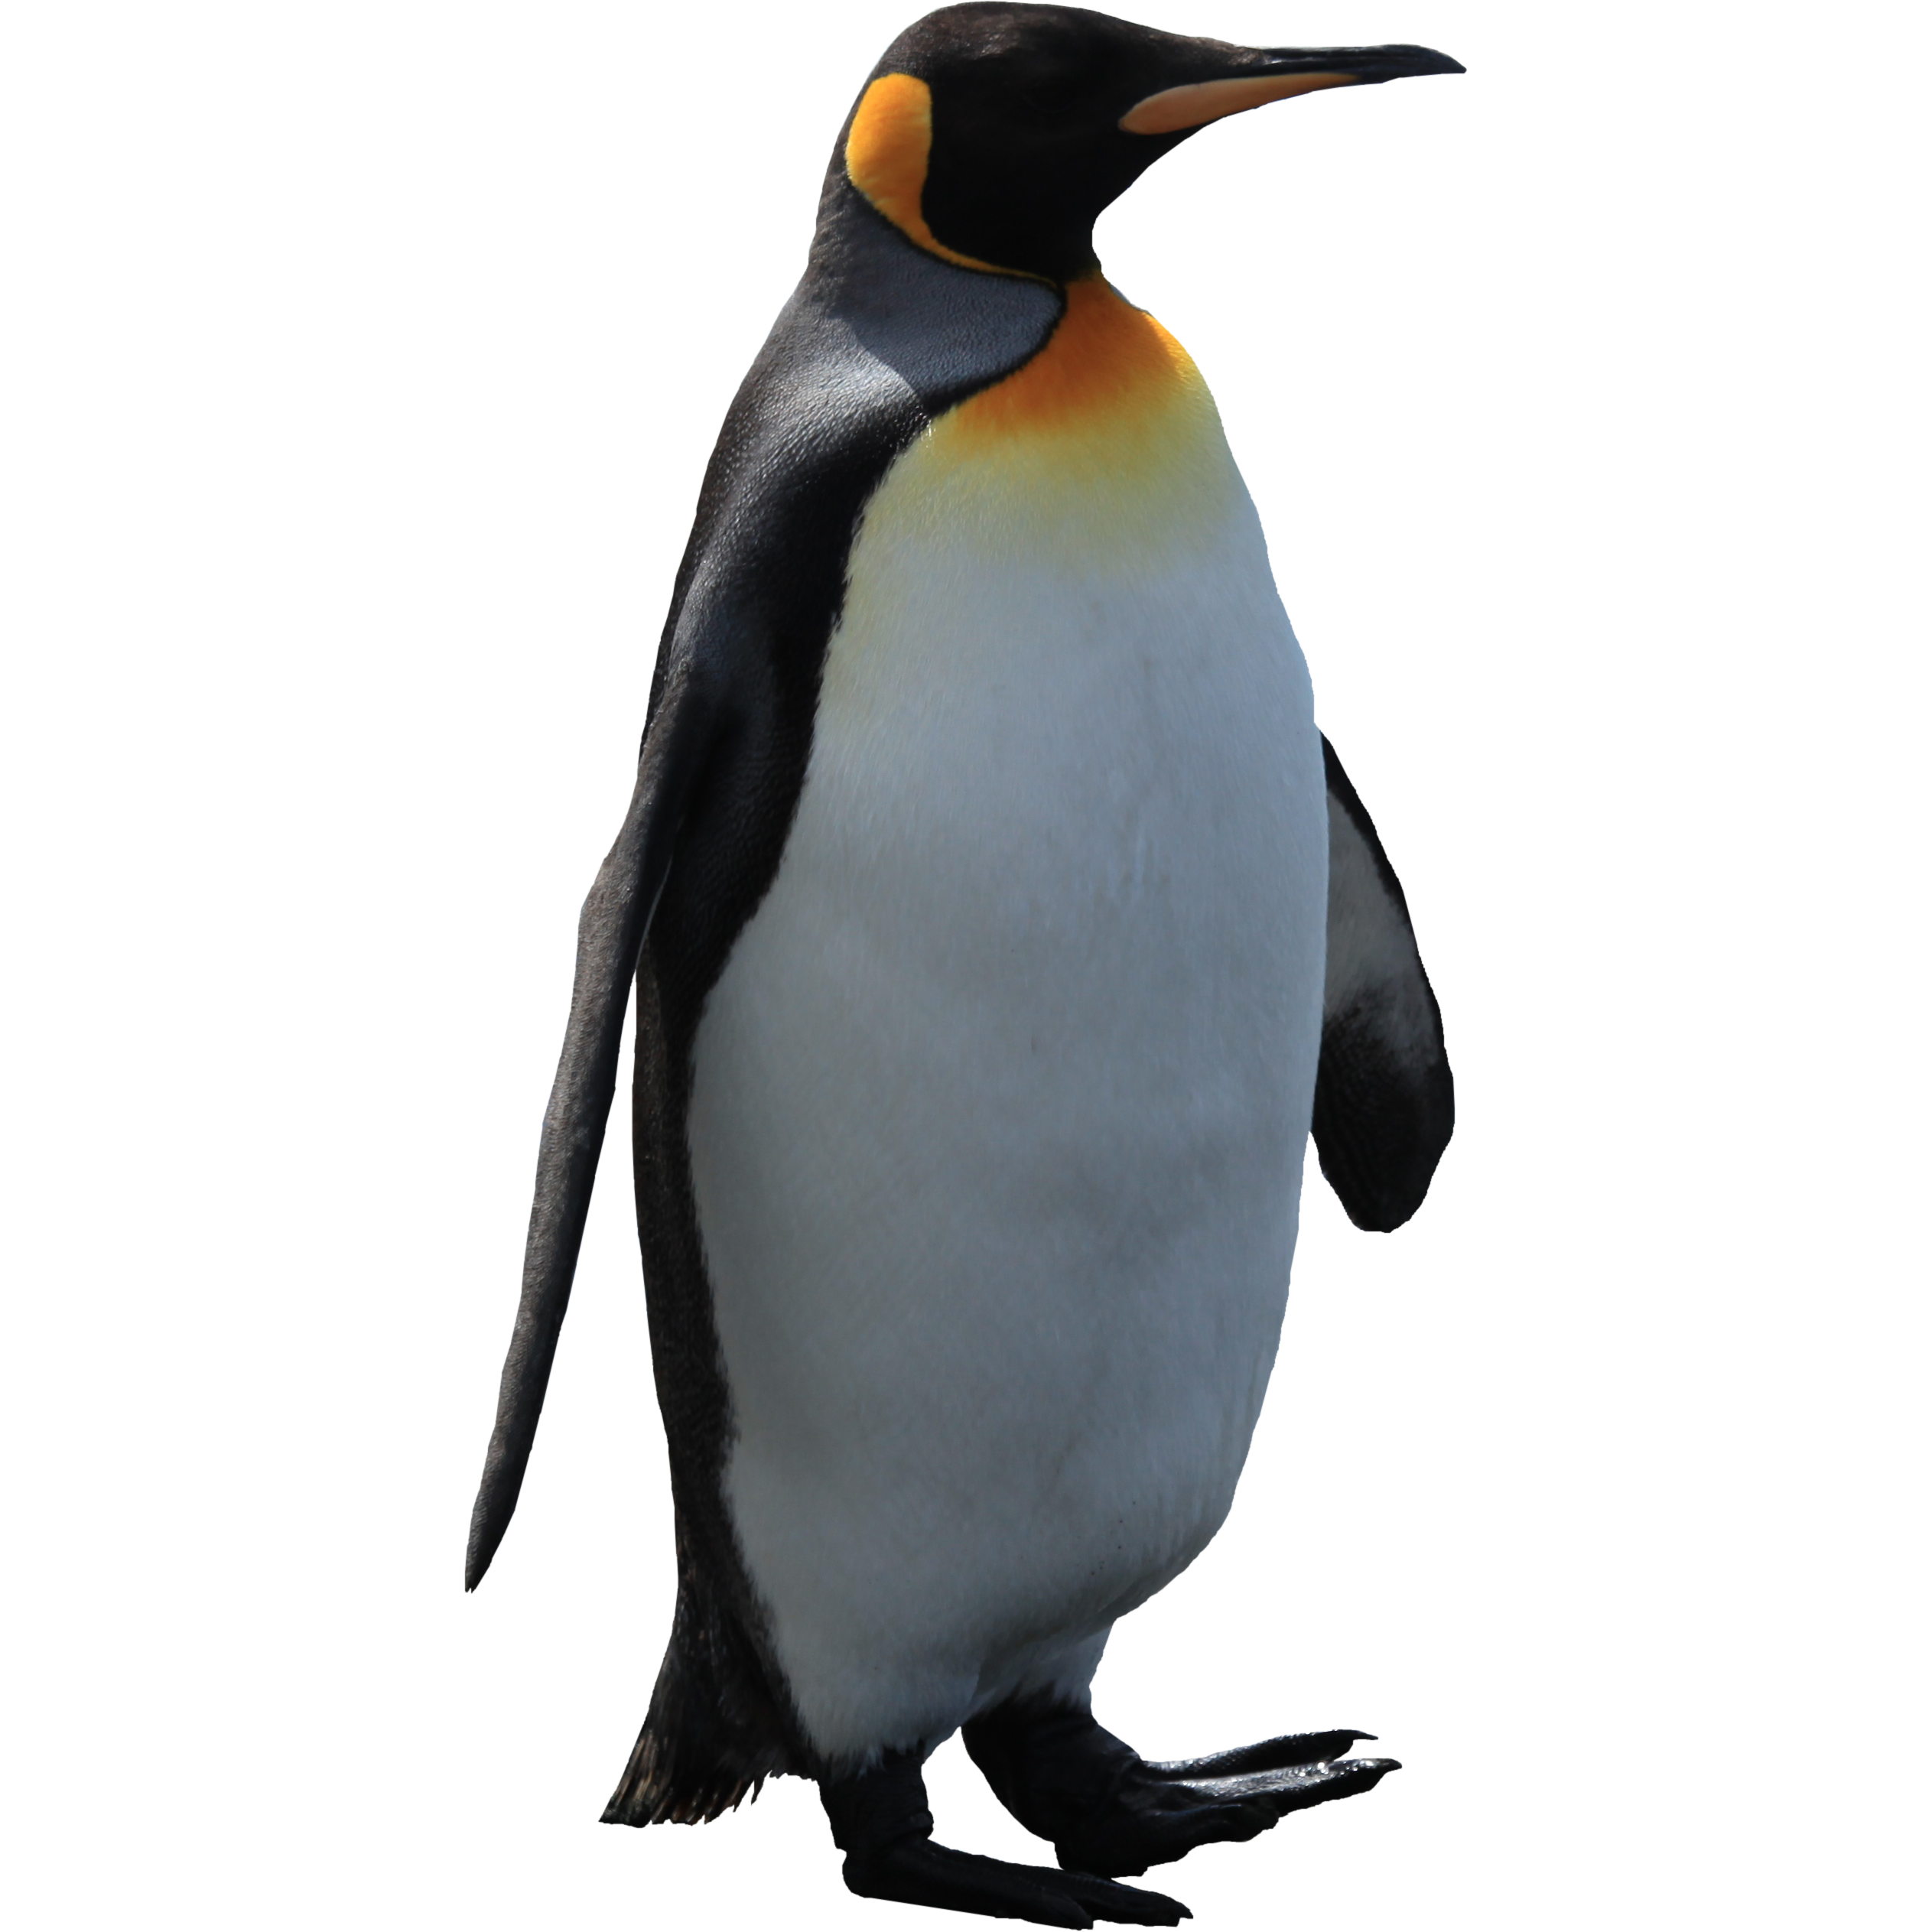 Penguin Pictures Collection (46+)